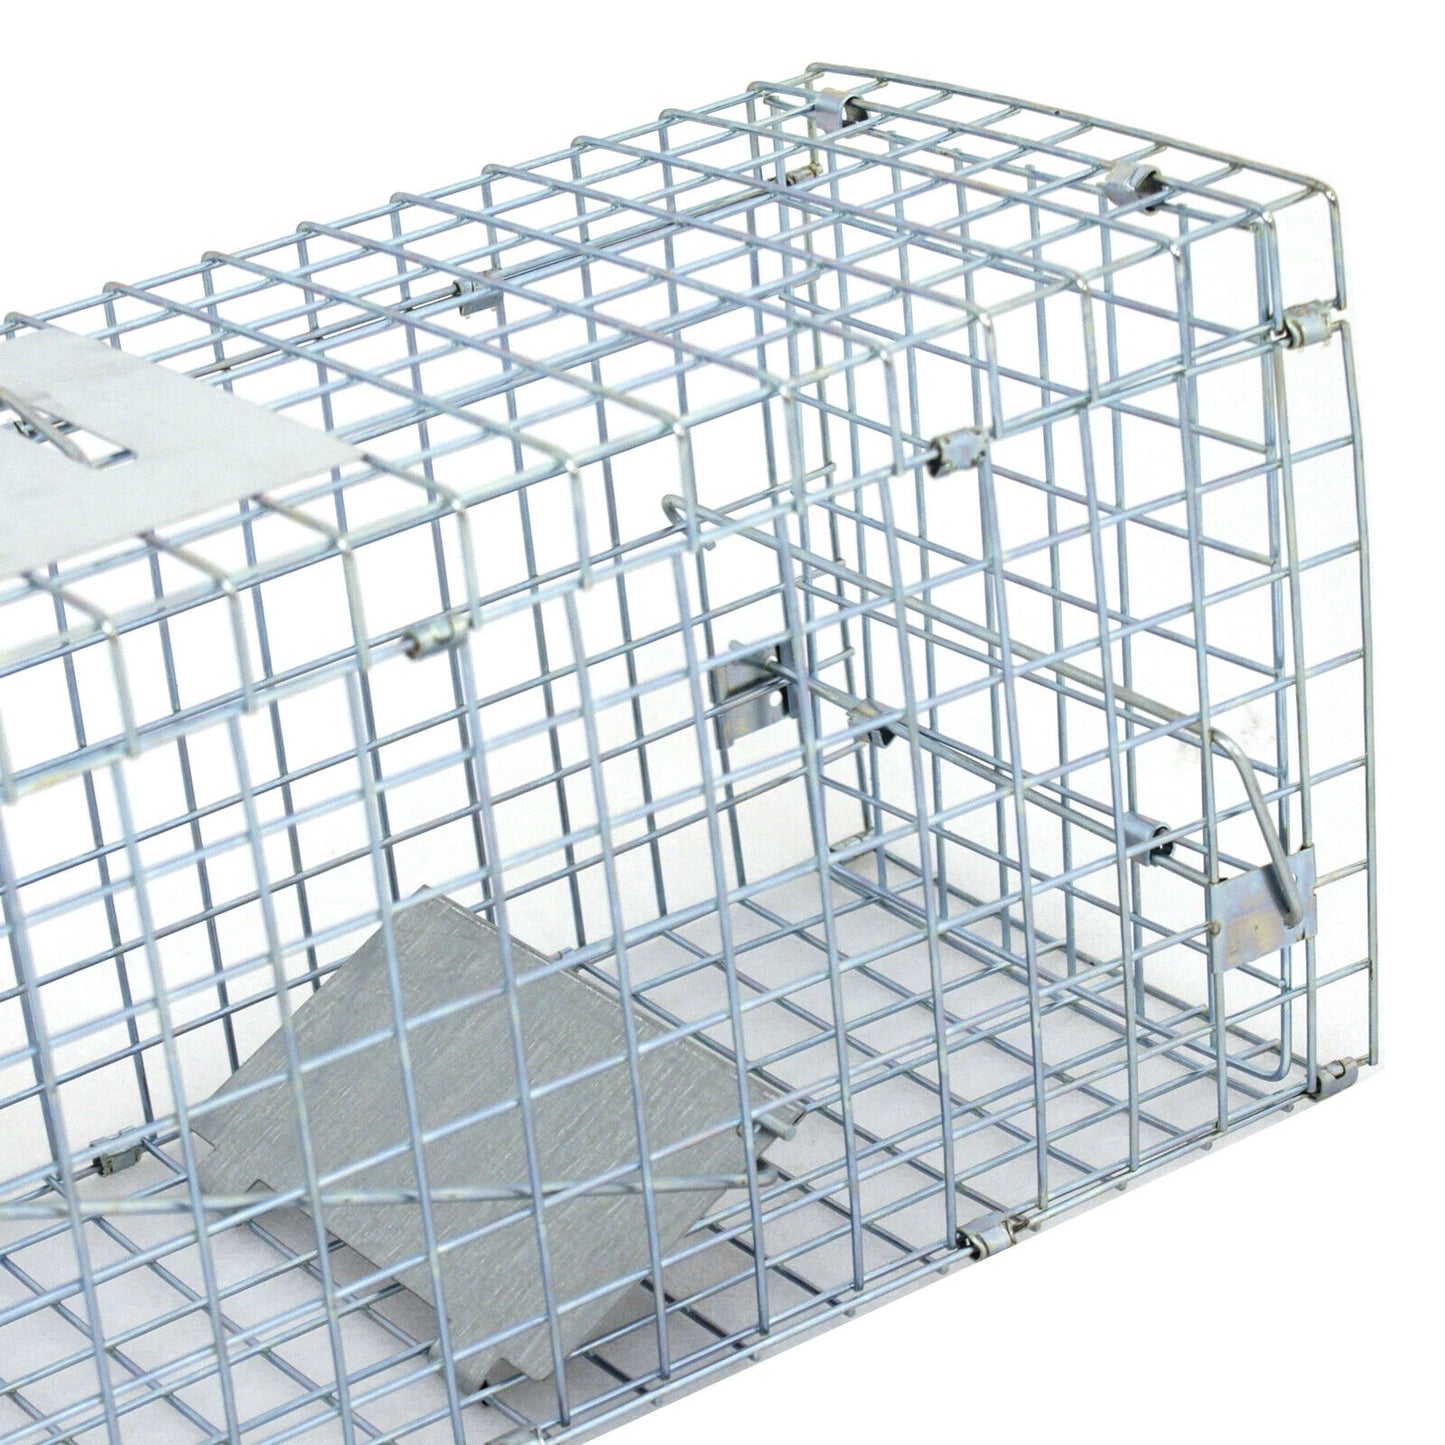 Live Animal Cage Mouse Trap Rat Hamster Catch Control Bait Hunting Survival New